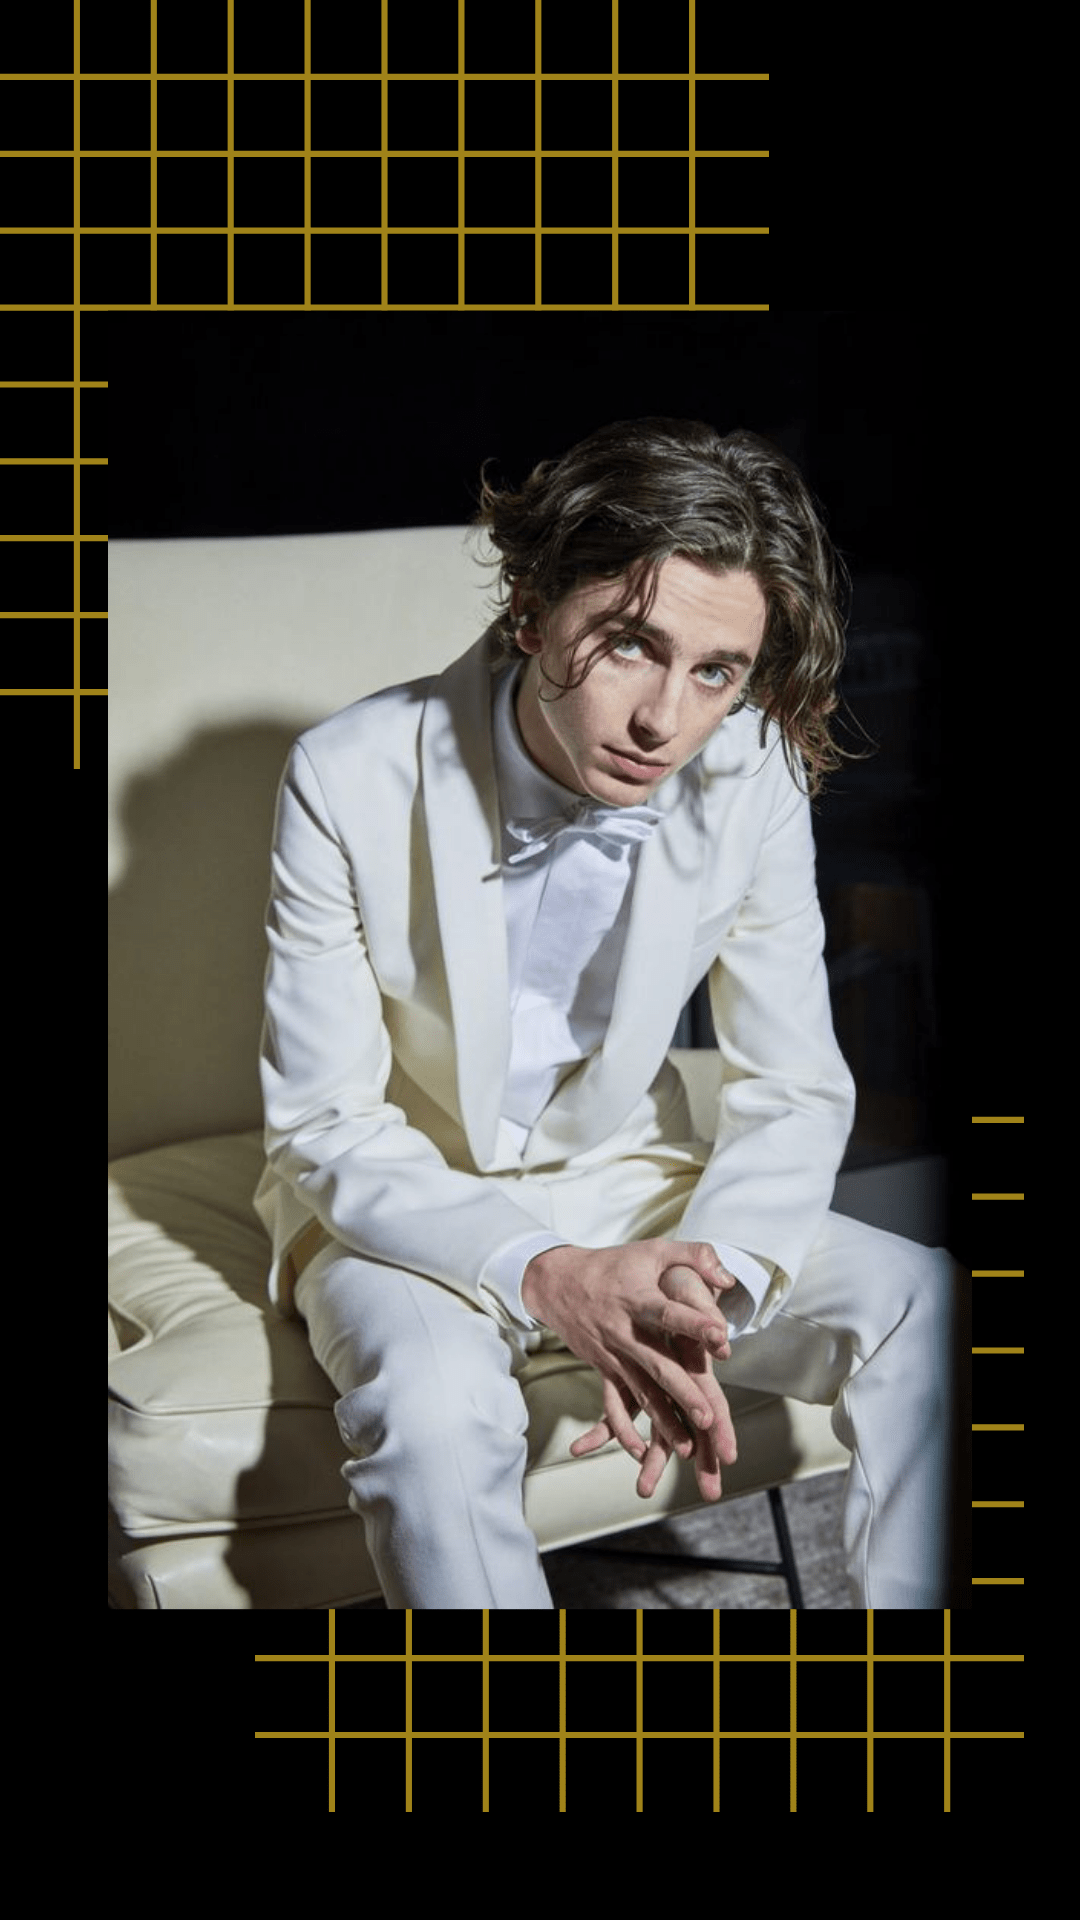 Timothee Chalamet in a white suit sitting on a couch - Timothee Chalamet